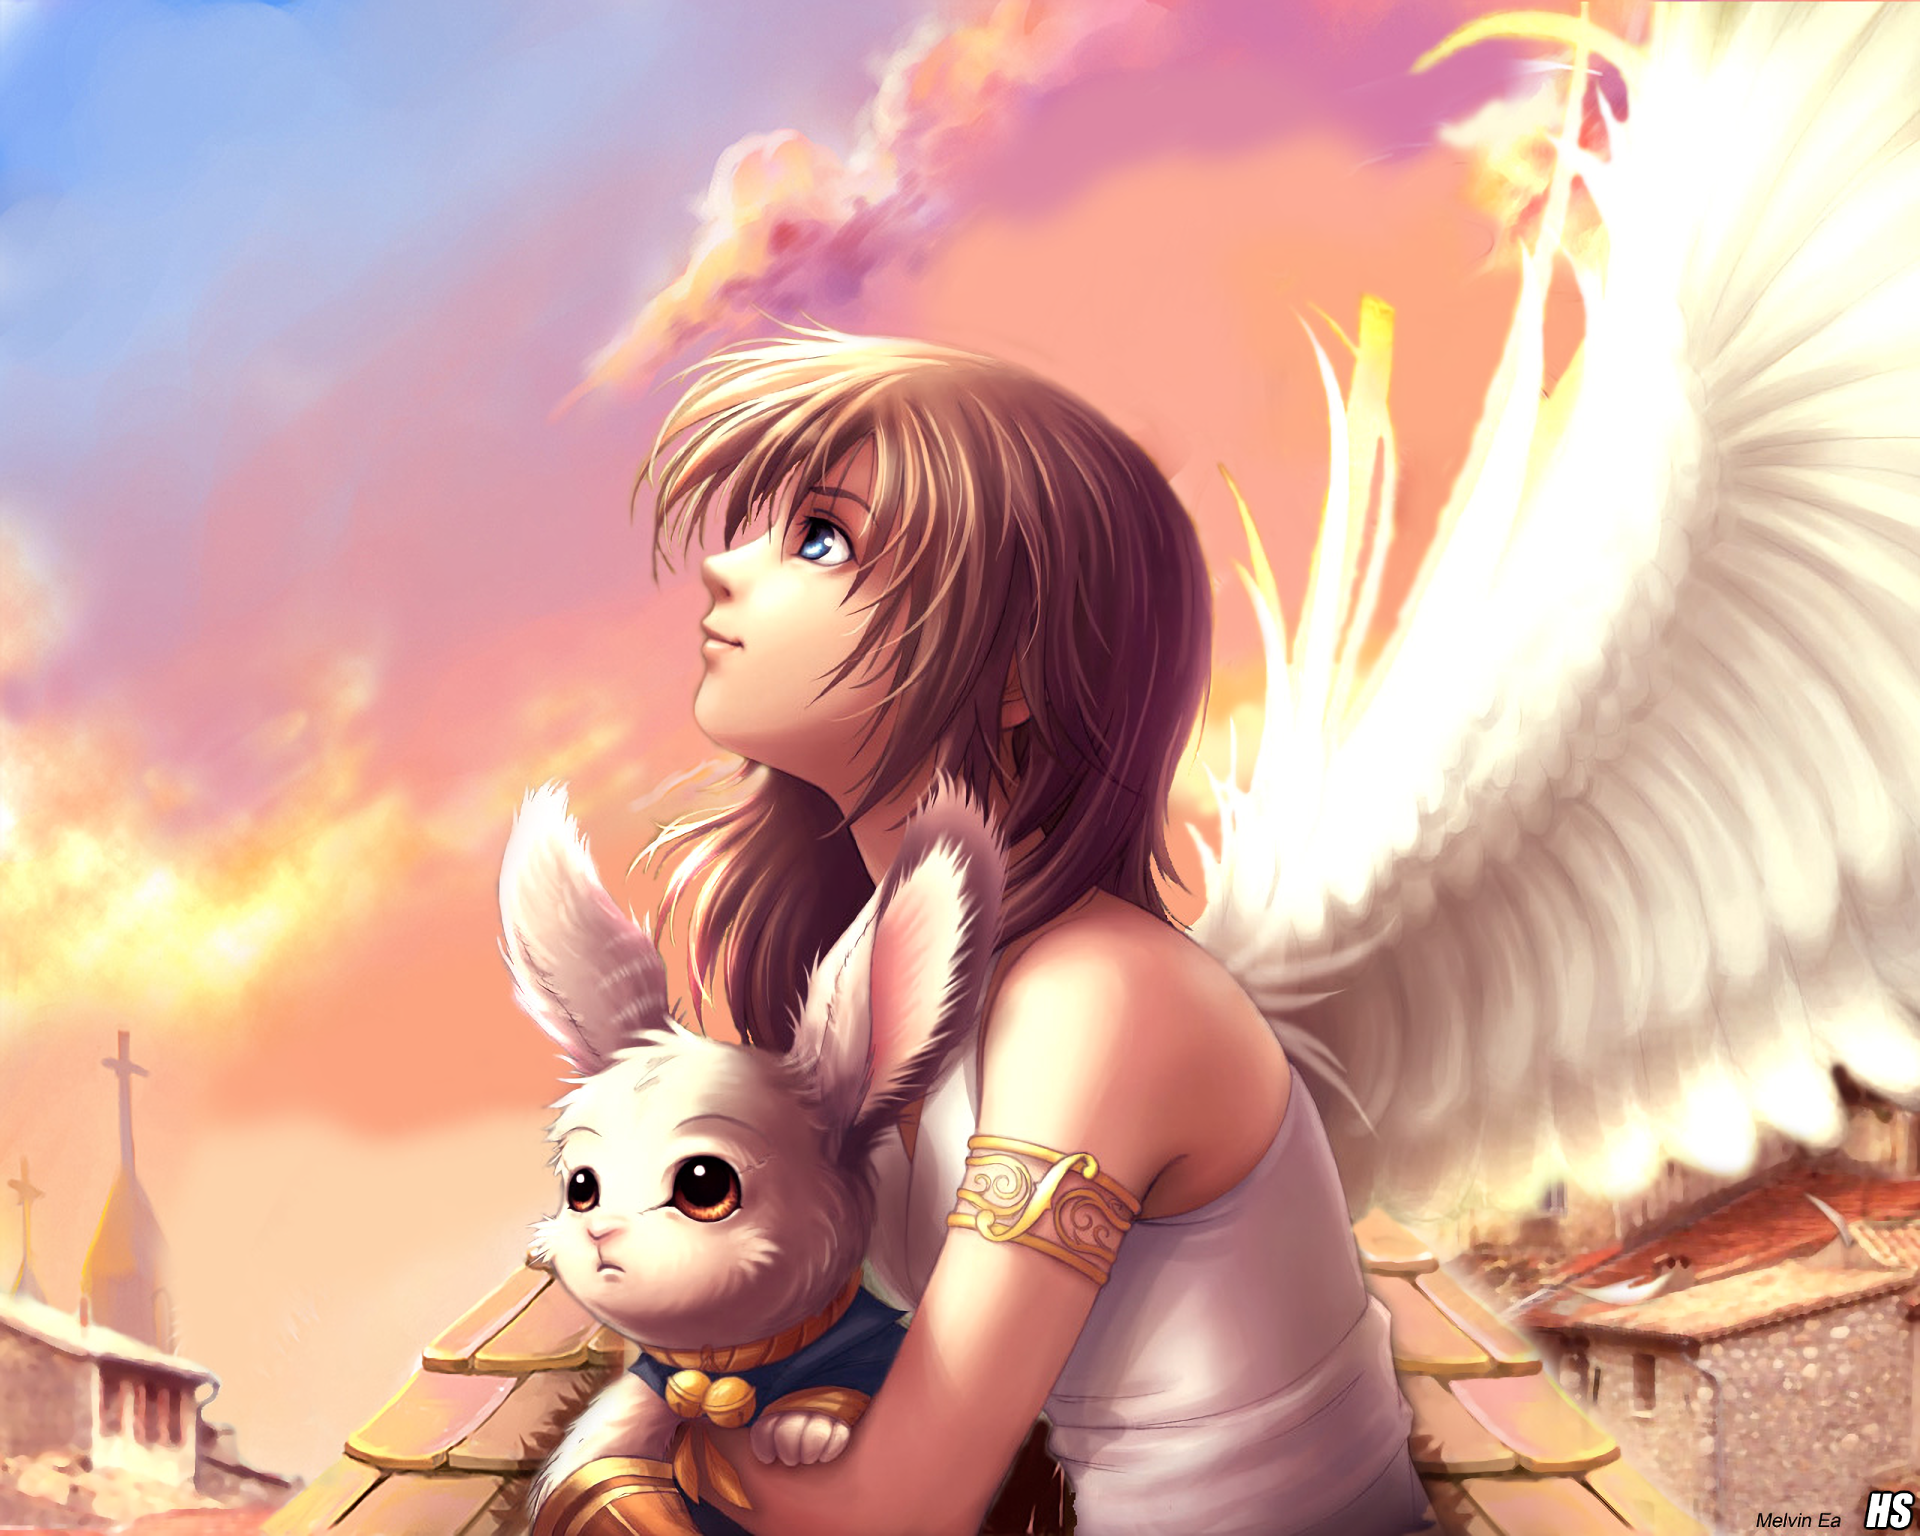 Anime Angels - Anime Angels updated their cover photo.-demhanvico.com.vn